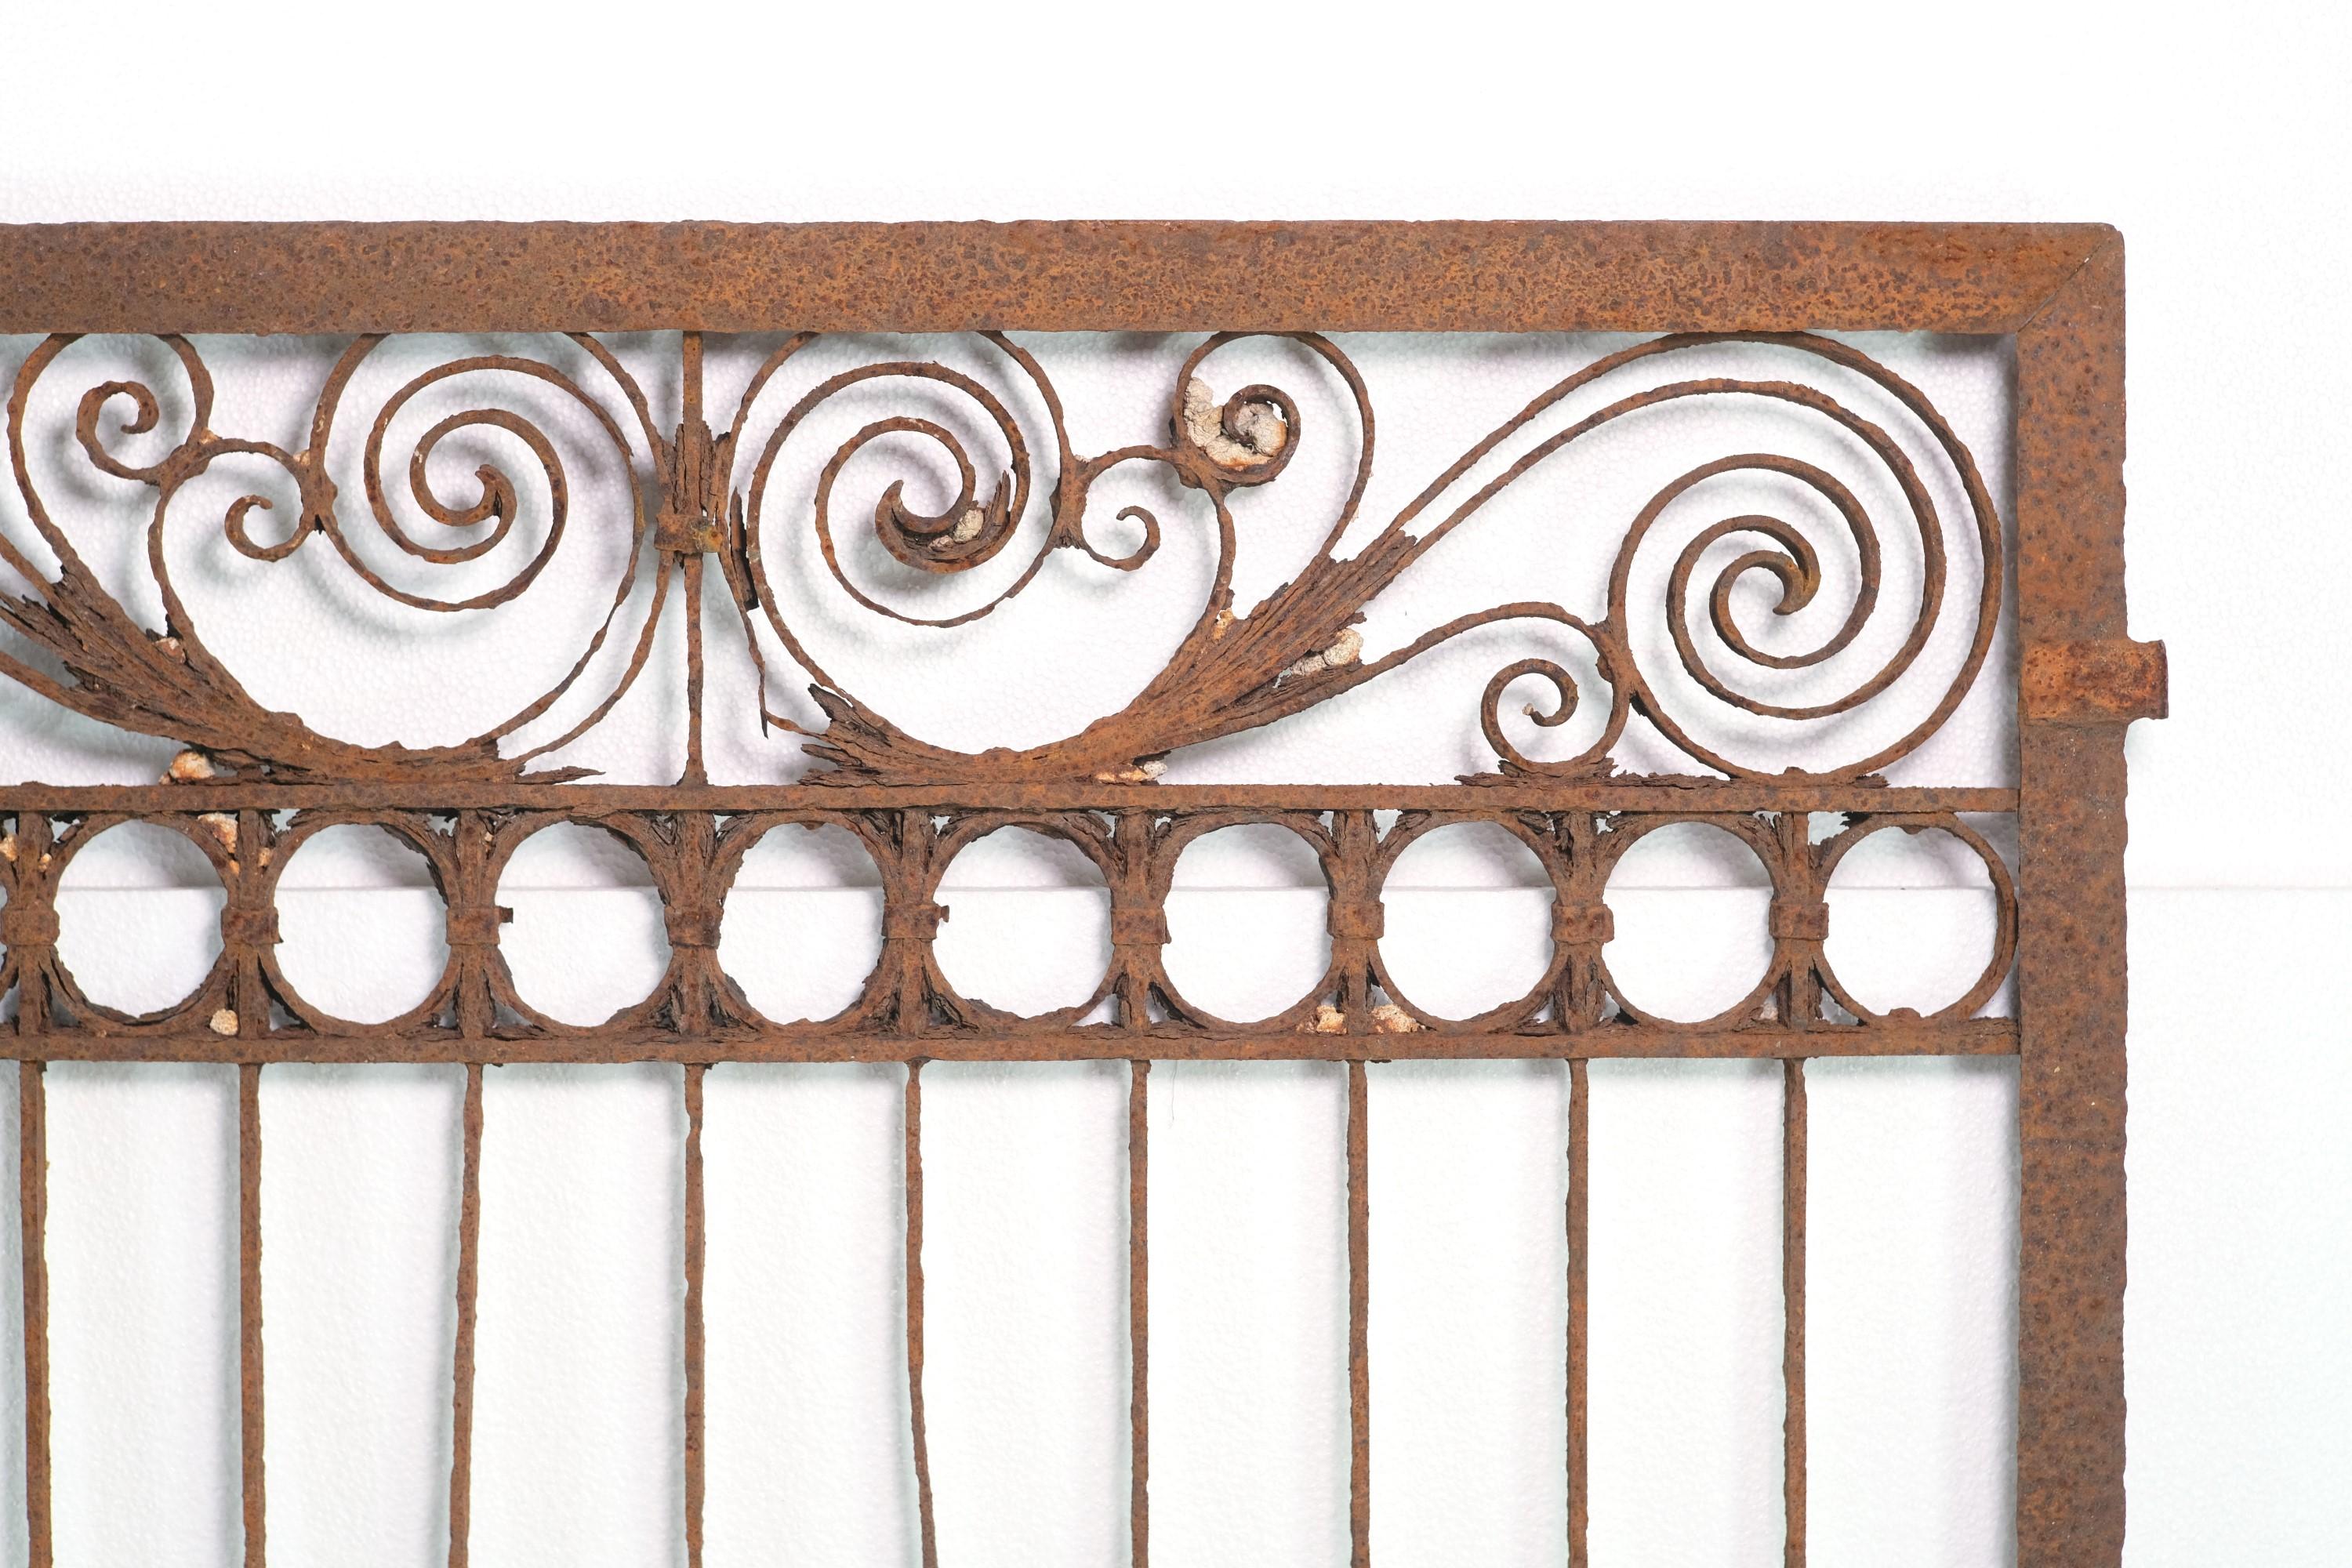 Original Antique late 1800s wrought iron fence wall divider. Manufacturing with banding and pinned pieces. Features ornate curls and spirals. Some bends with lots of rust. Minor missing pieces. Please see photos. This can be seen at our 400 Gilligan